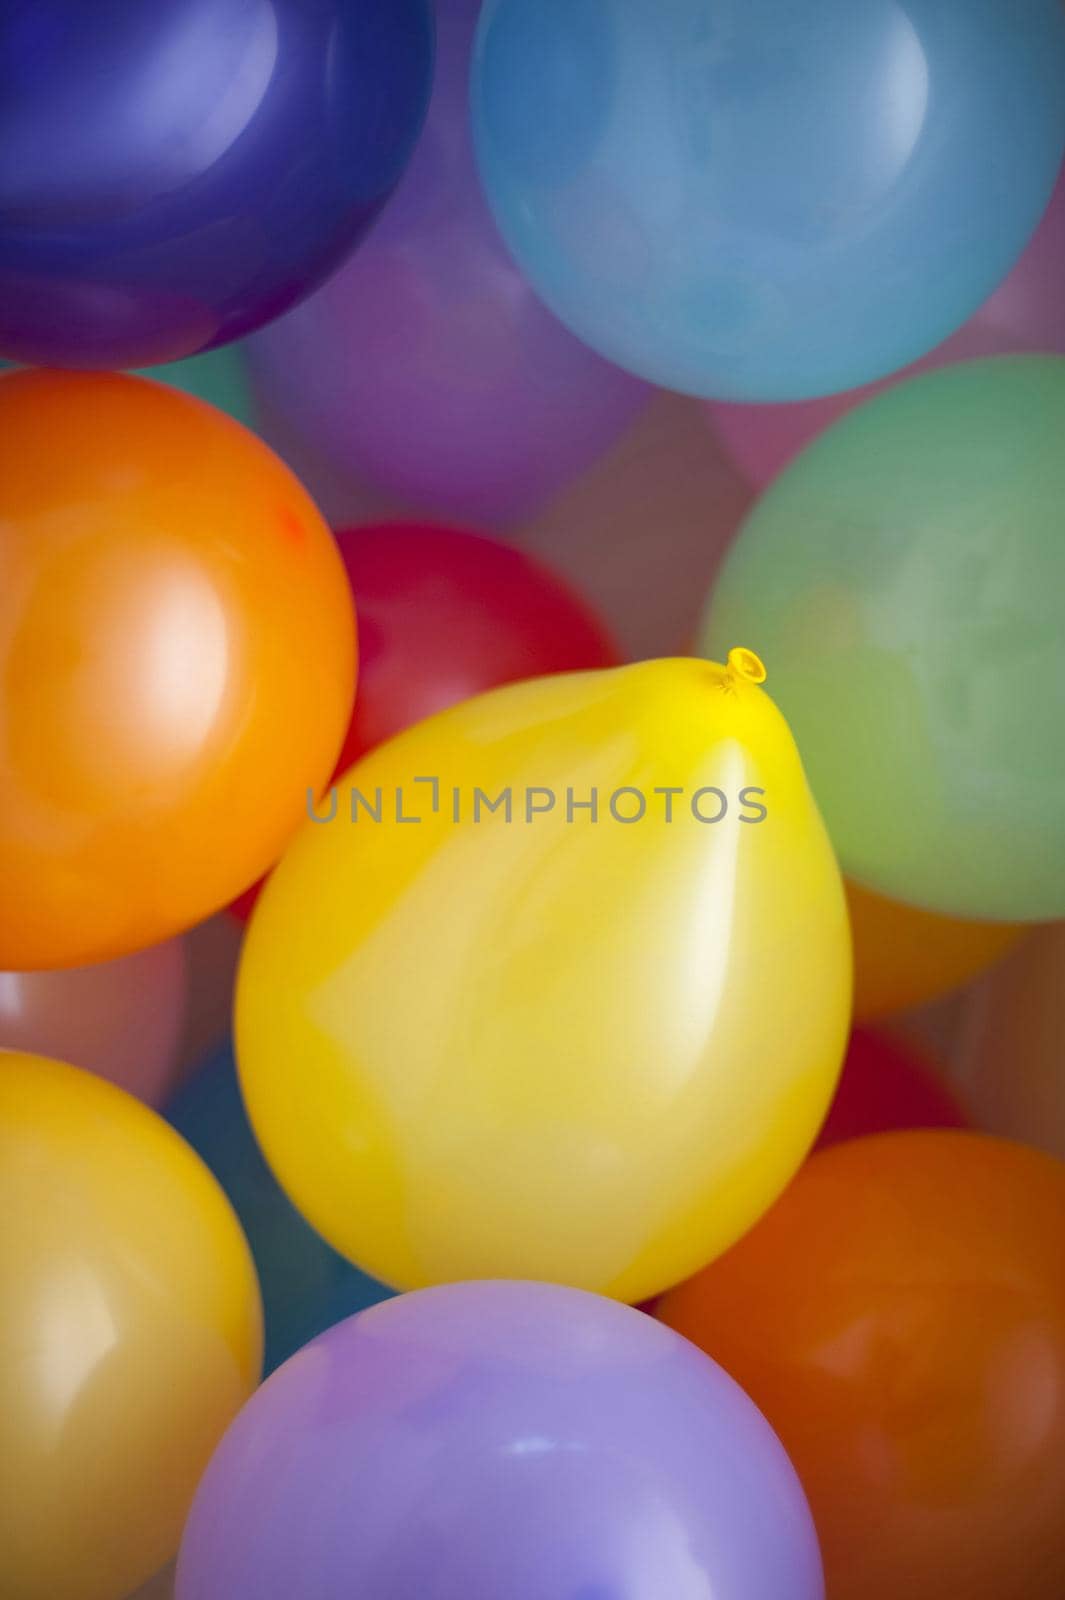 colored balloons by sanisra